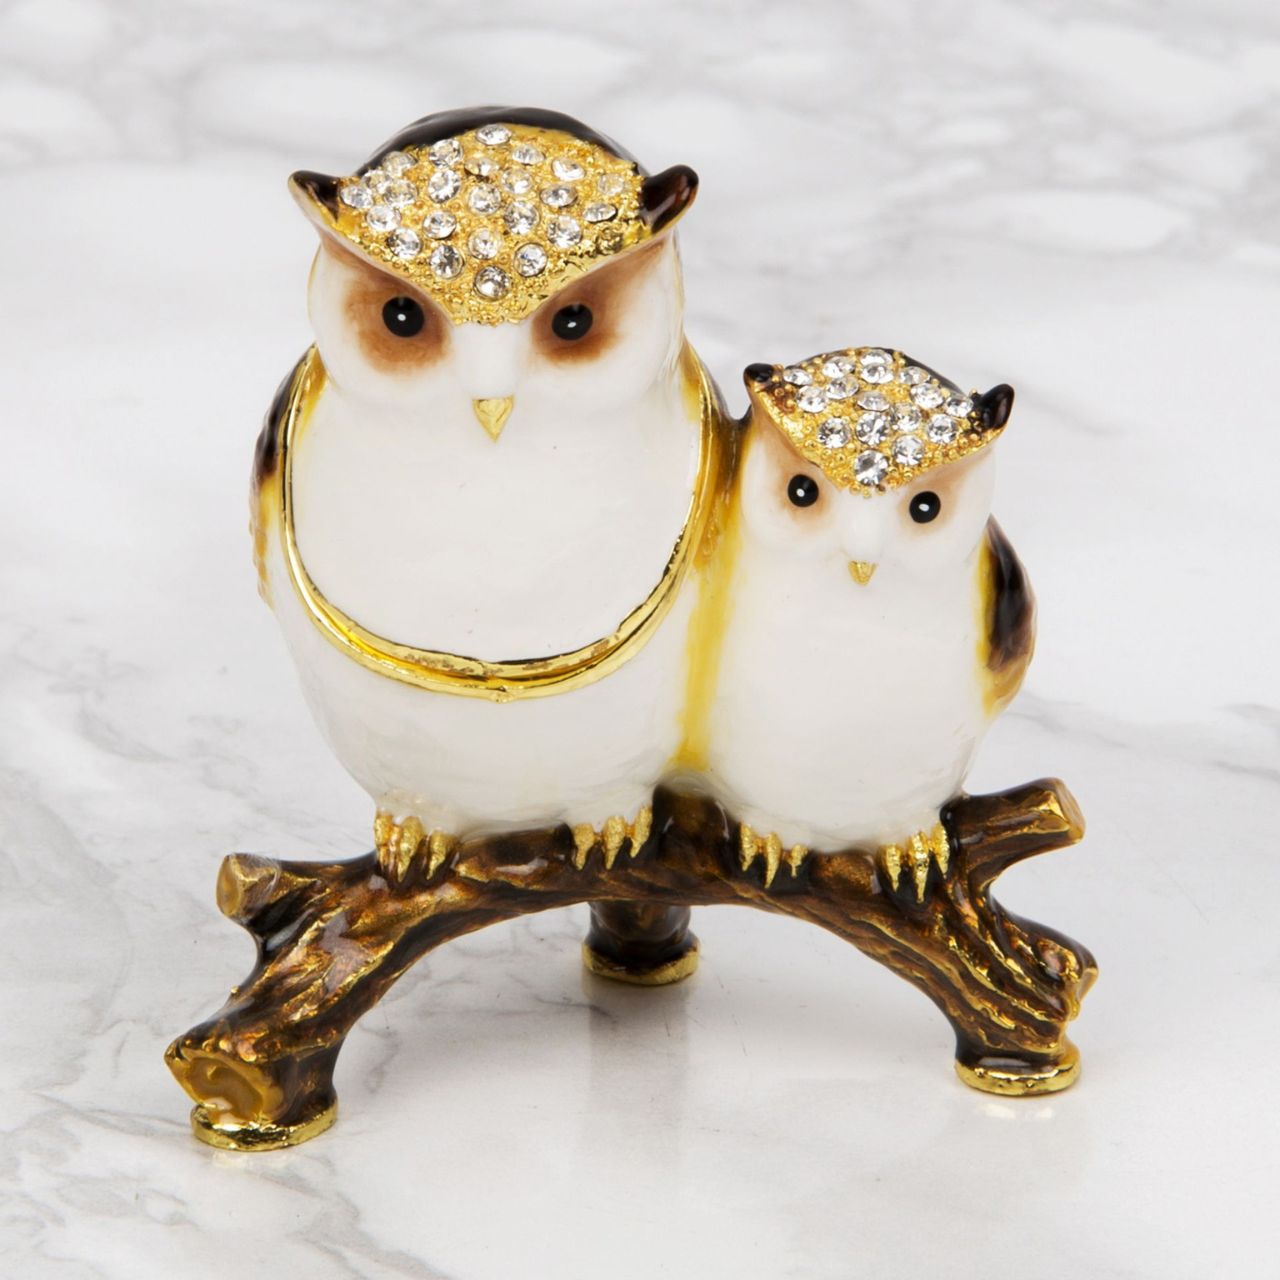 Treasured Trinkets - Mother & Baby Owl  A beautiful, hand painted and crystal finished Mother & Baby Owl trinket box from Treasured Trinkets.